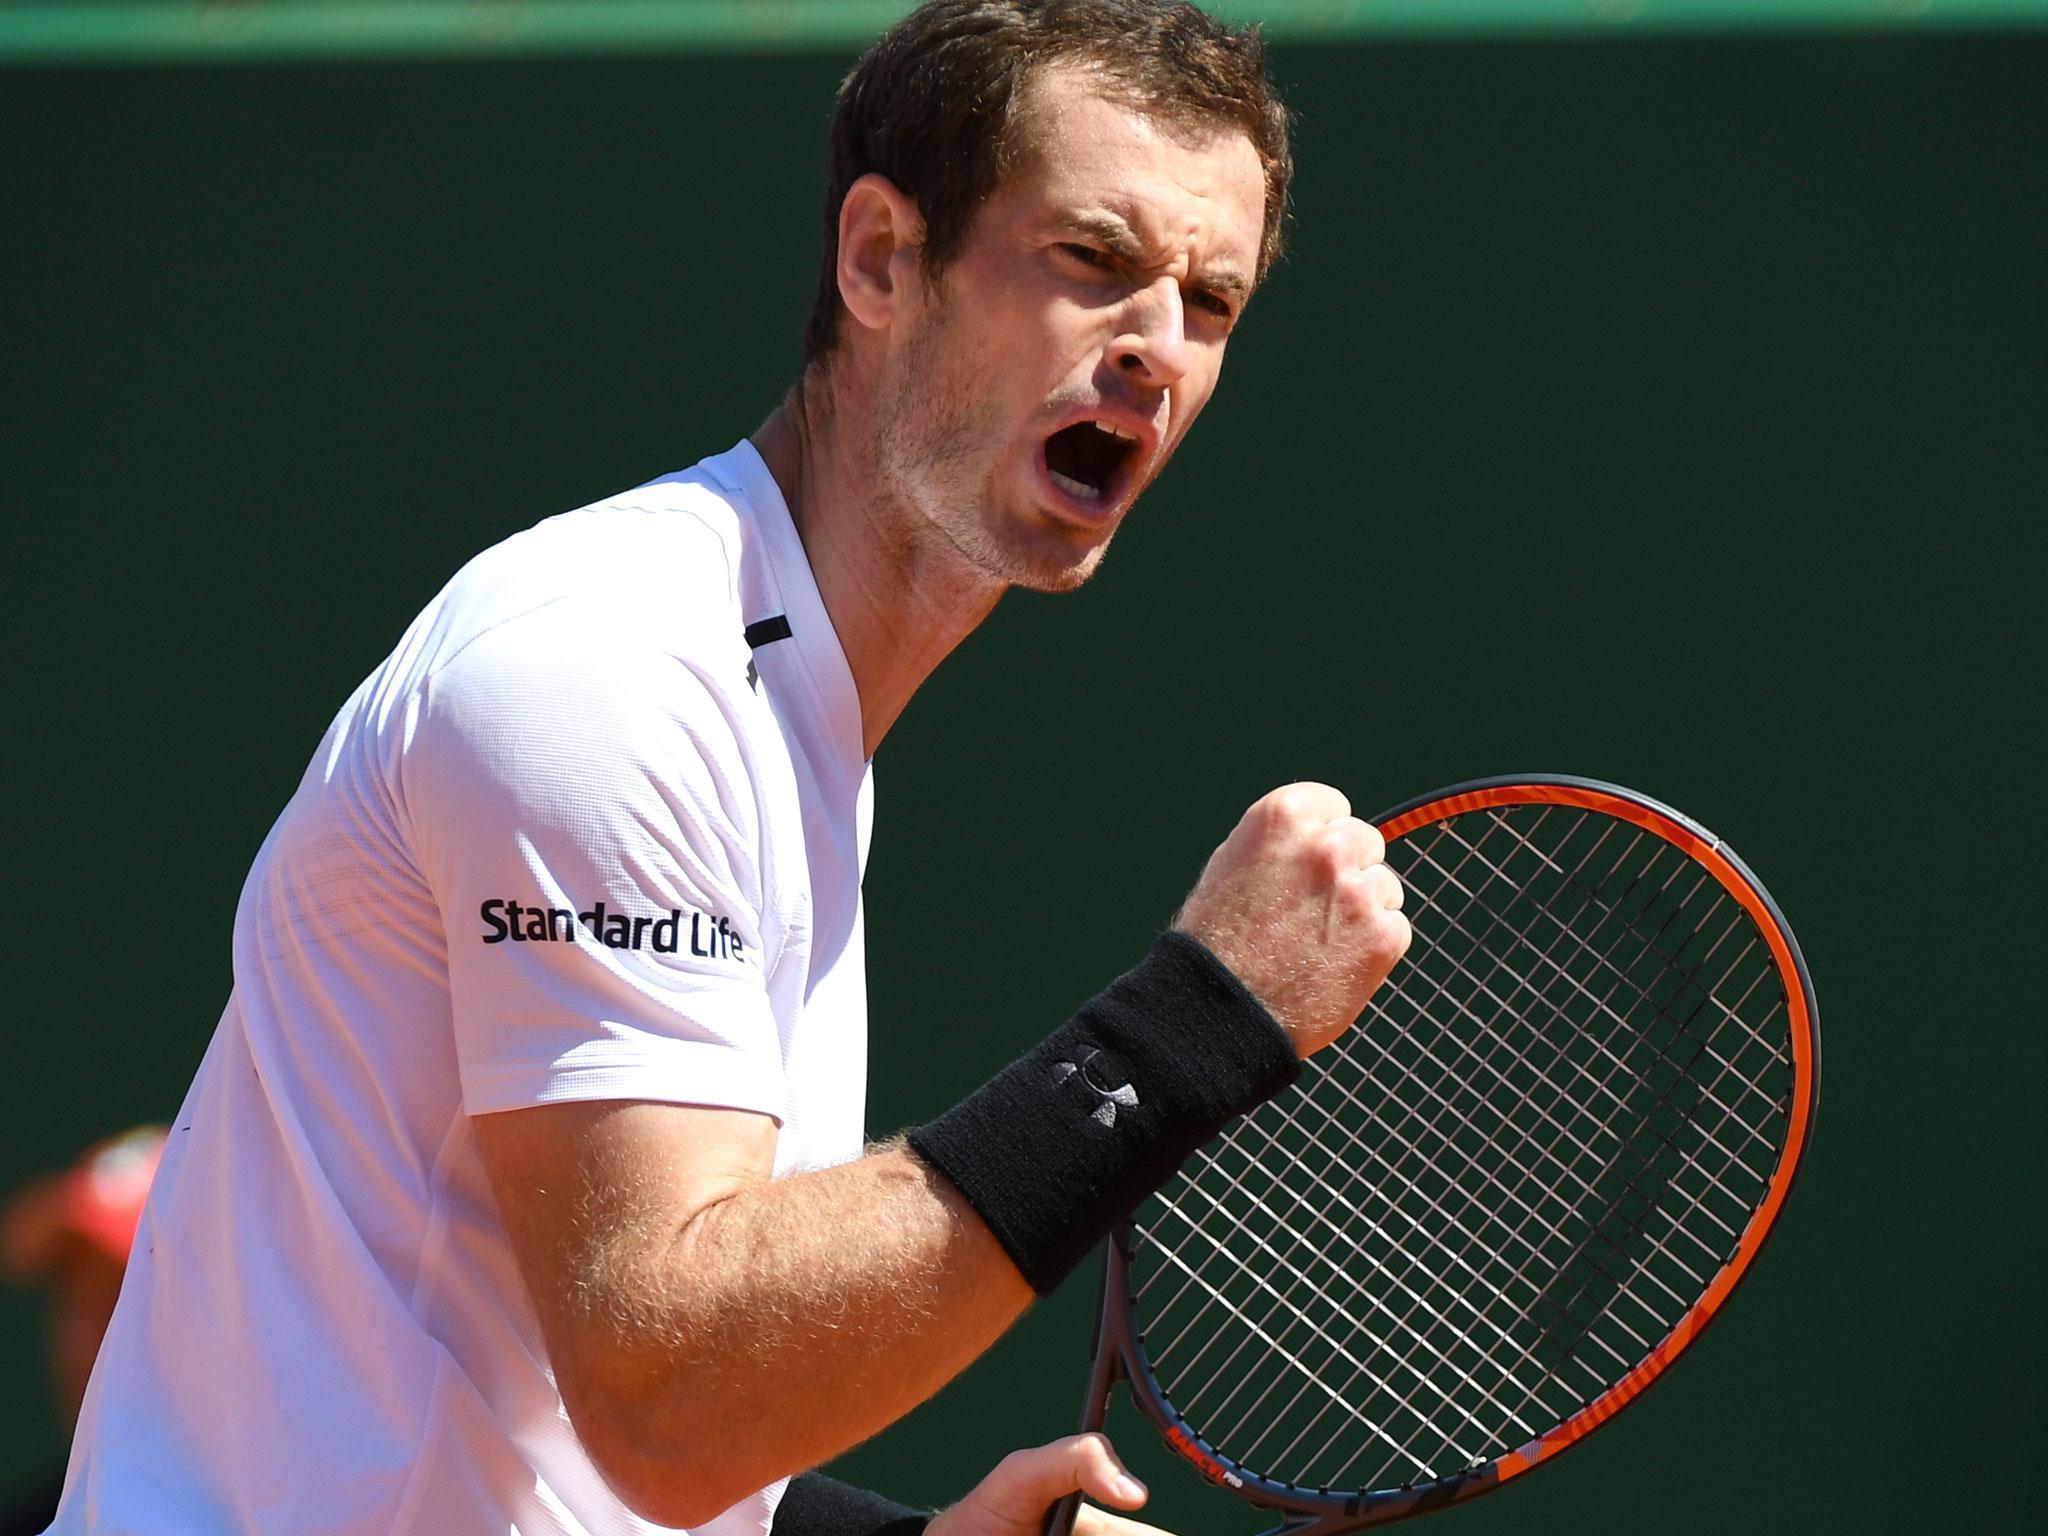 Andy Murray won on his return to competitive tennis